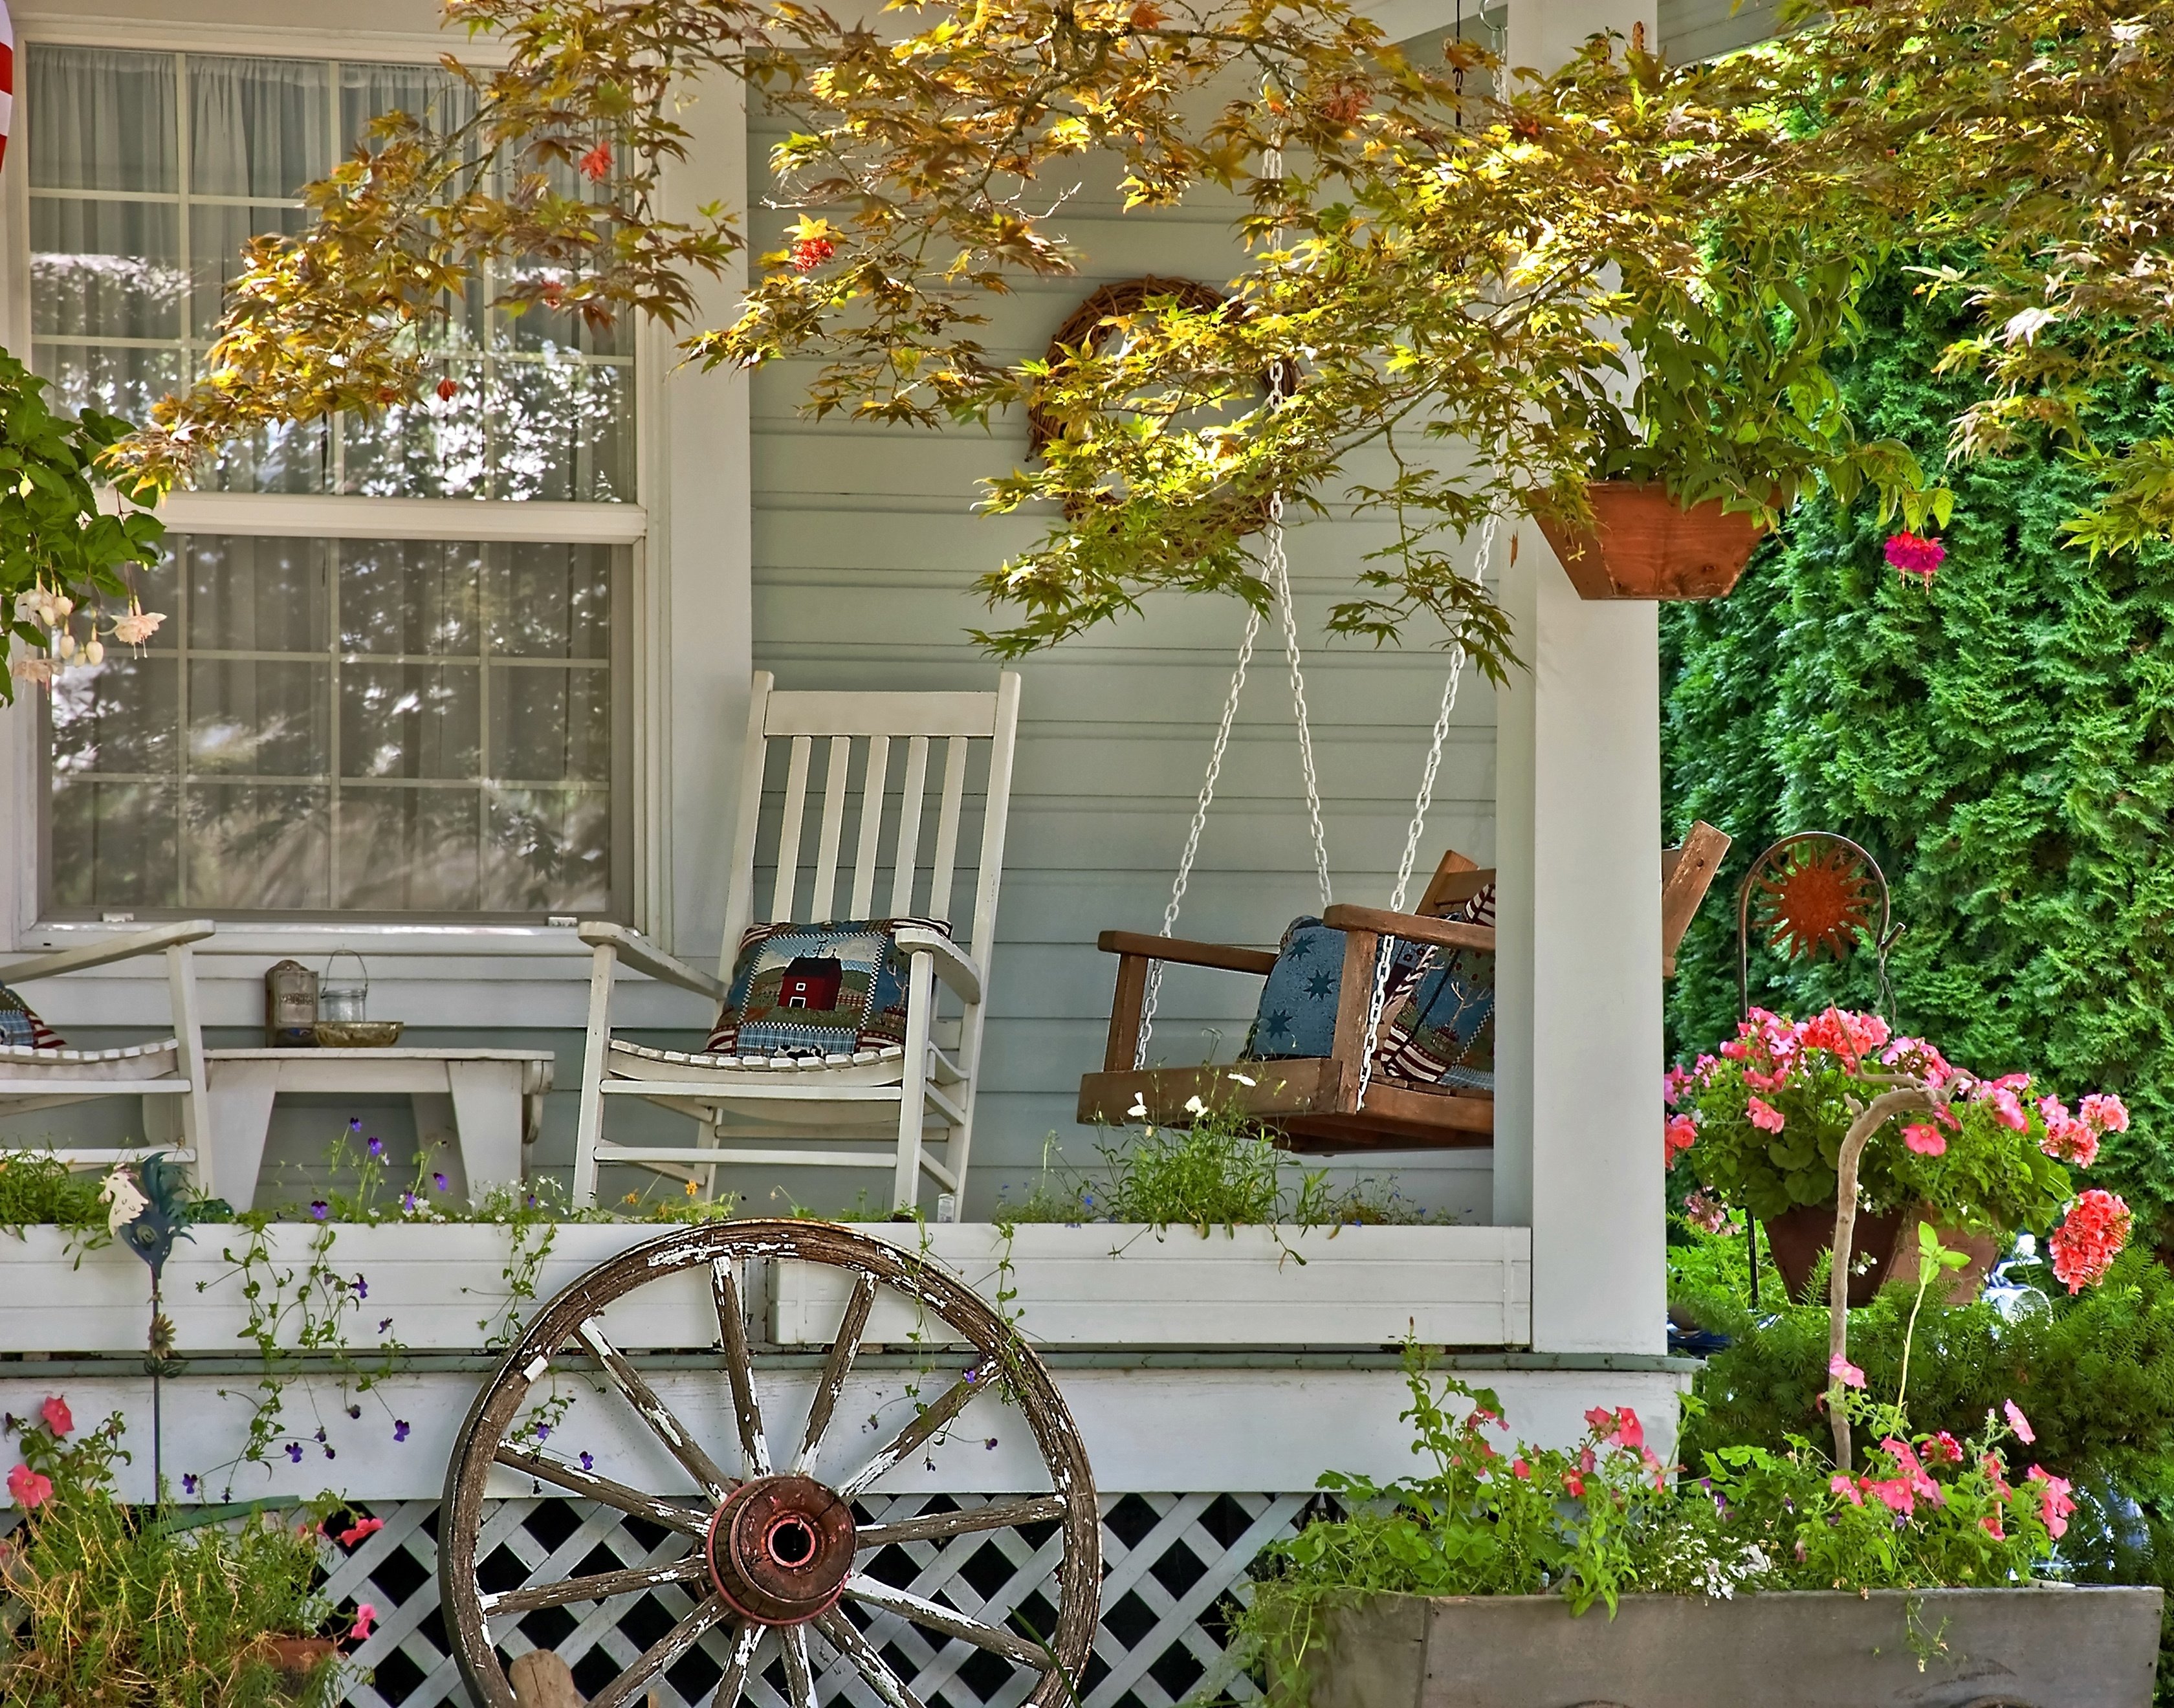 10 Trendy Porch Decorating Ideas For Summer architecture design of porch decorating ideas summer 2013 decorating 2022